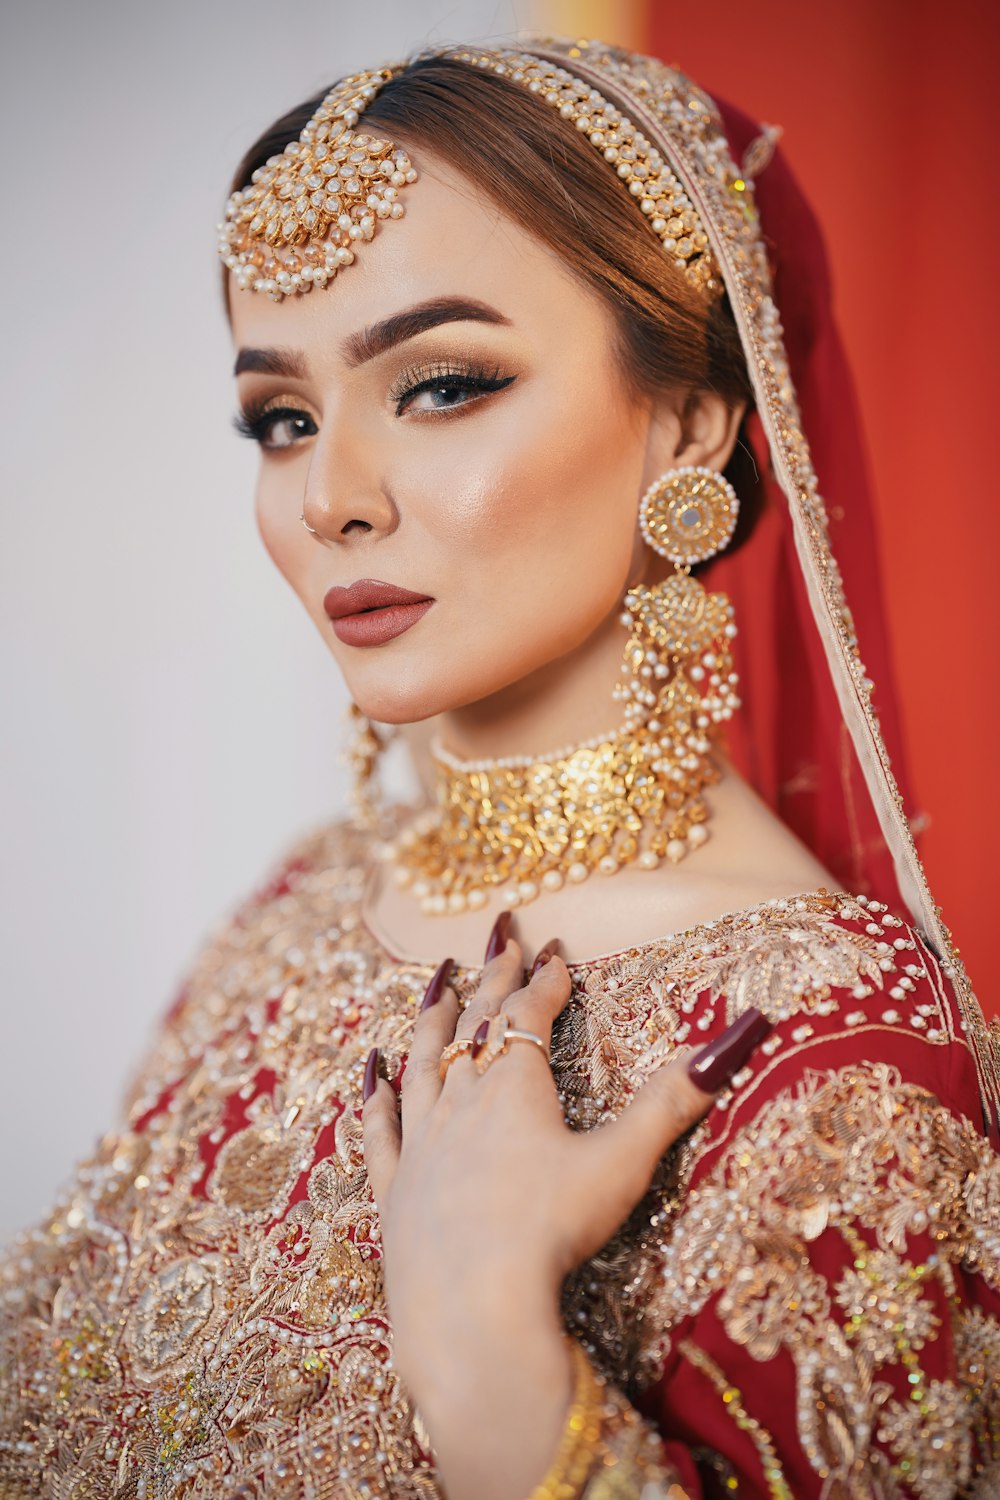 a woman wearing a red and gold bridal outfit